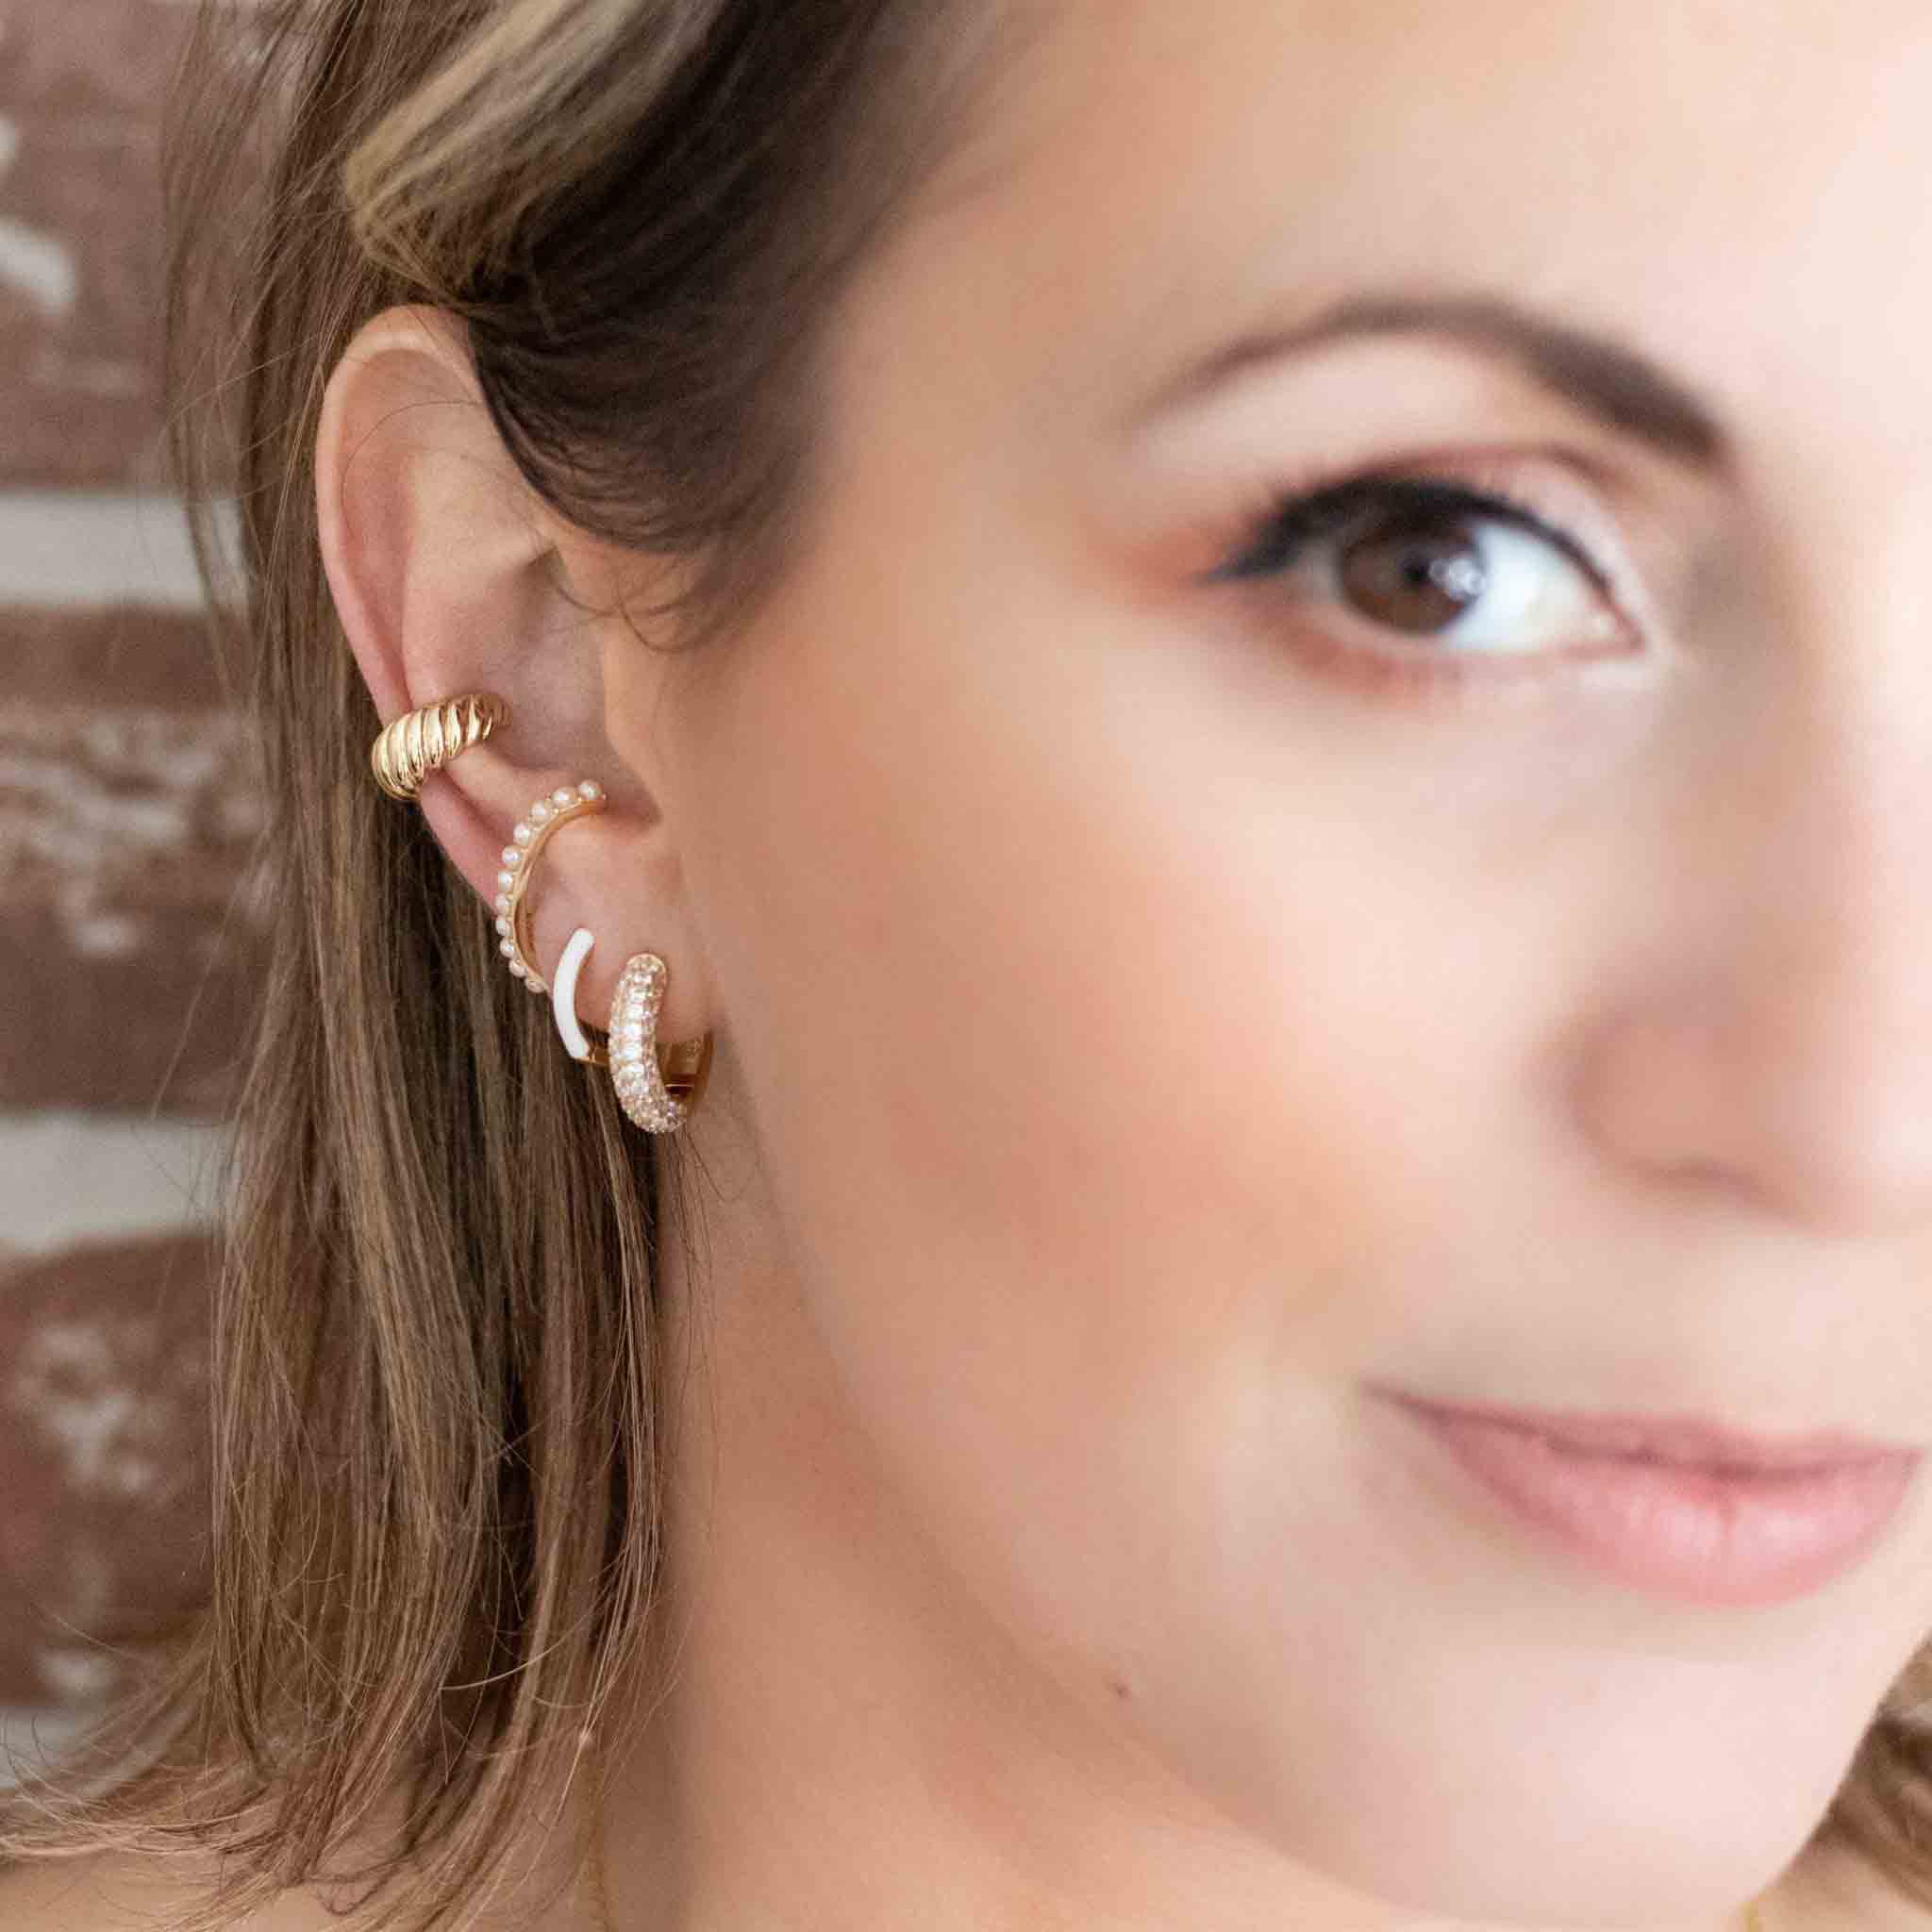 Croissant Dome Ear Cuff – The Curated Lobe